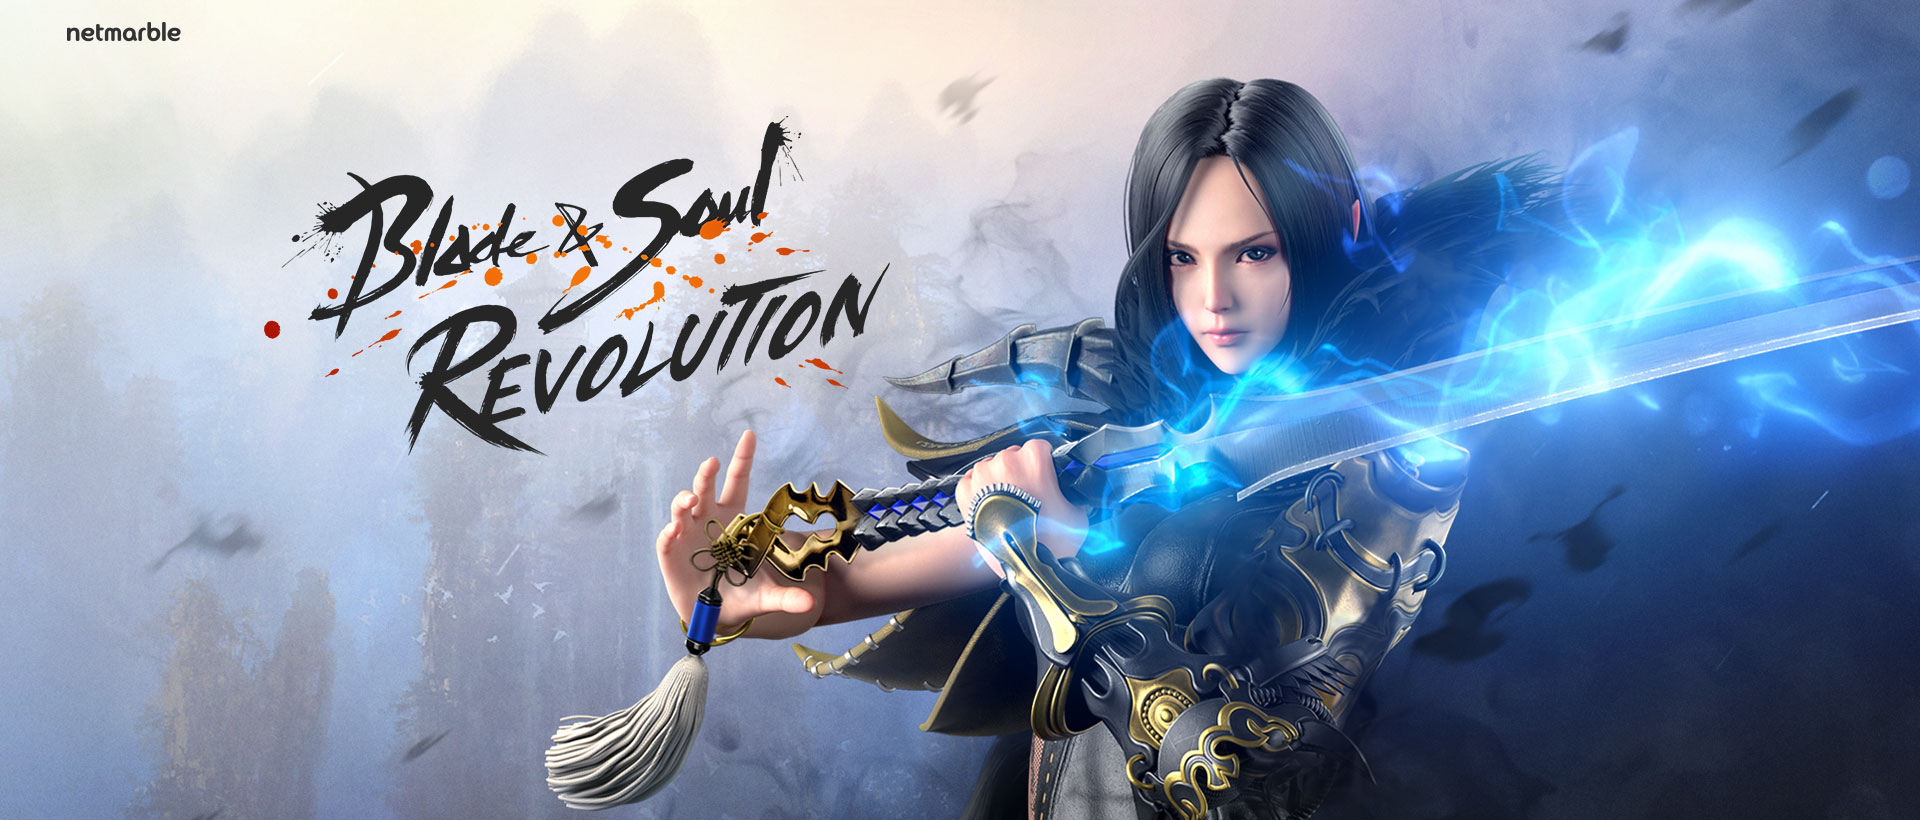 Download & Play Blade & Soul Revolution on PC & Mac with NoxPlayer (Emulator)